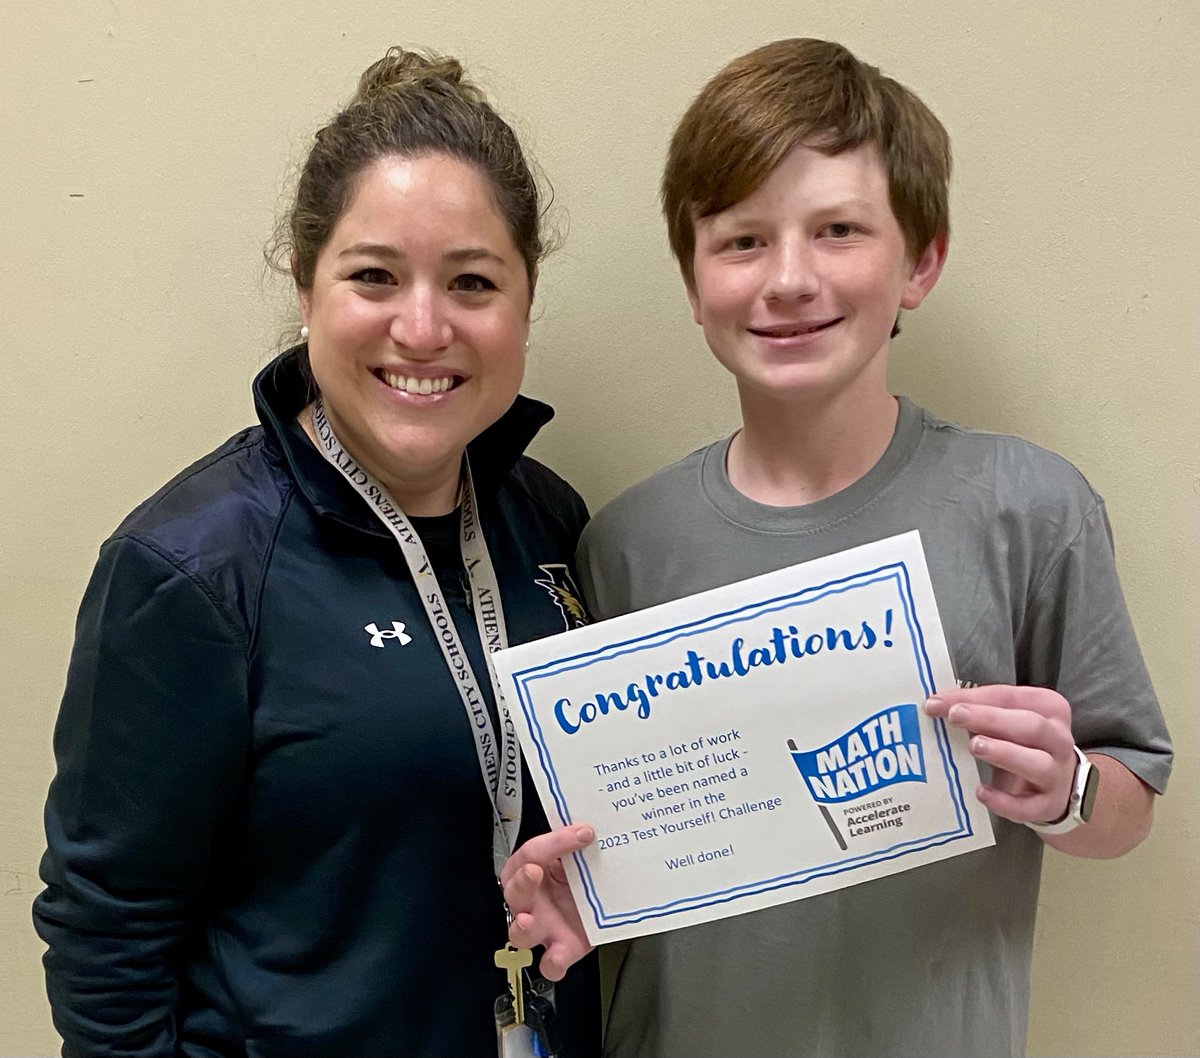 We are so proud to announce that Brayden is our @MathNationFL Test Yourself winner! He won a $25 gift card. Special thanks to @RachaelTuell, @kdockery100, &  @AMSTI_Athens! #OneAthens